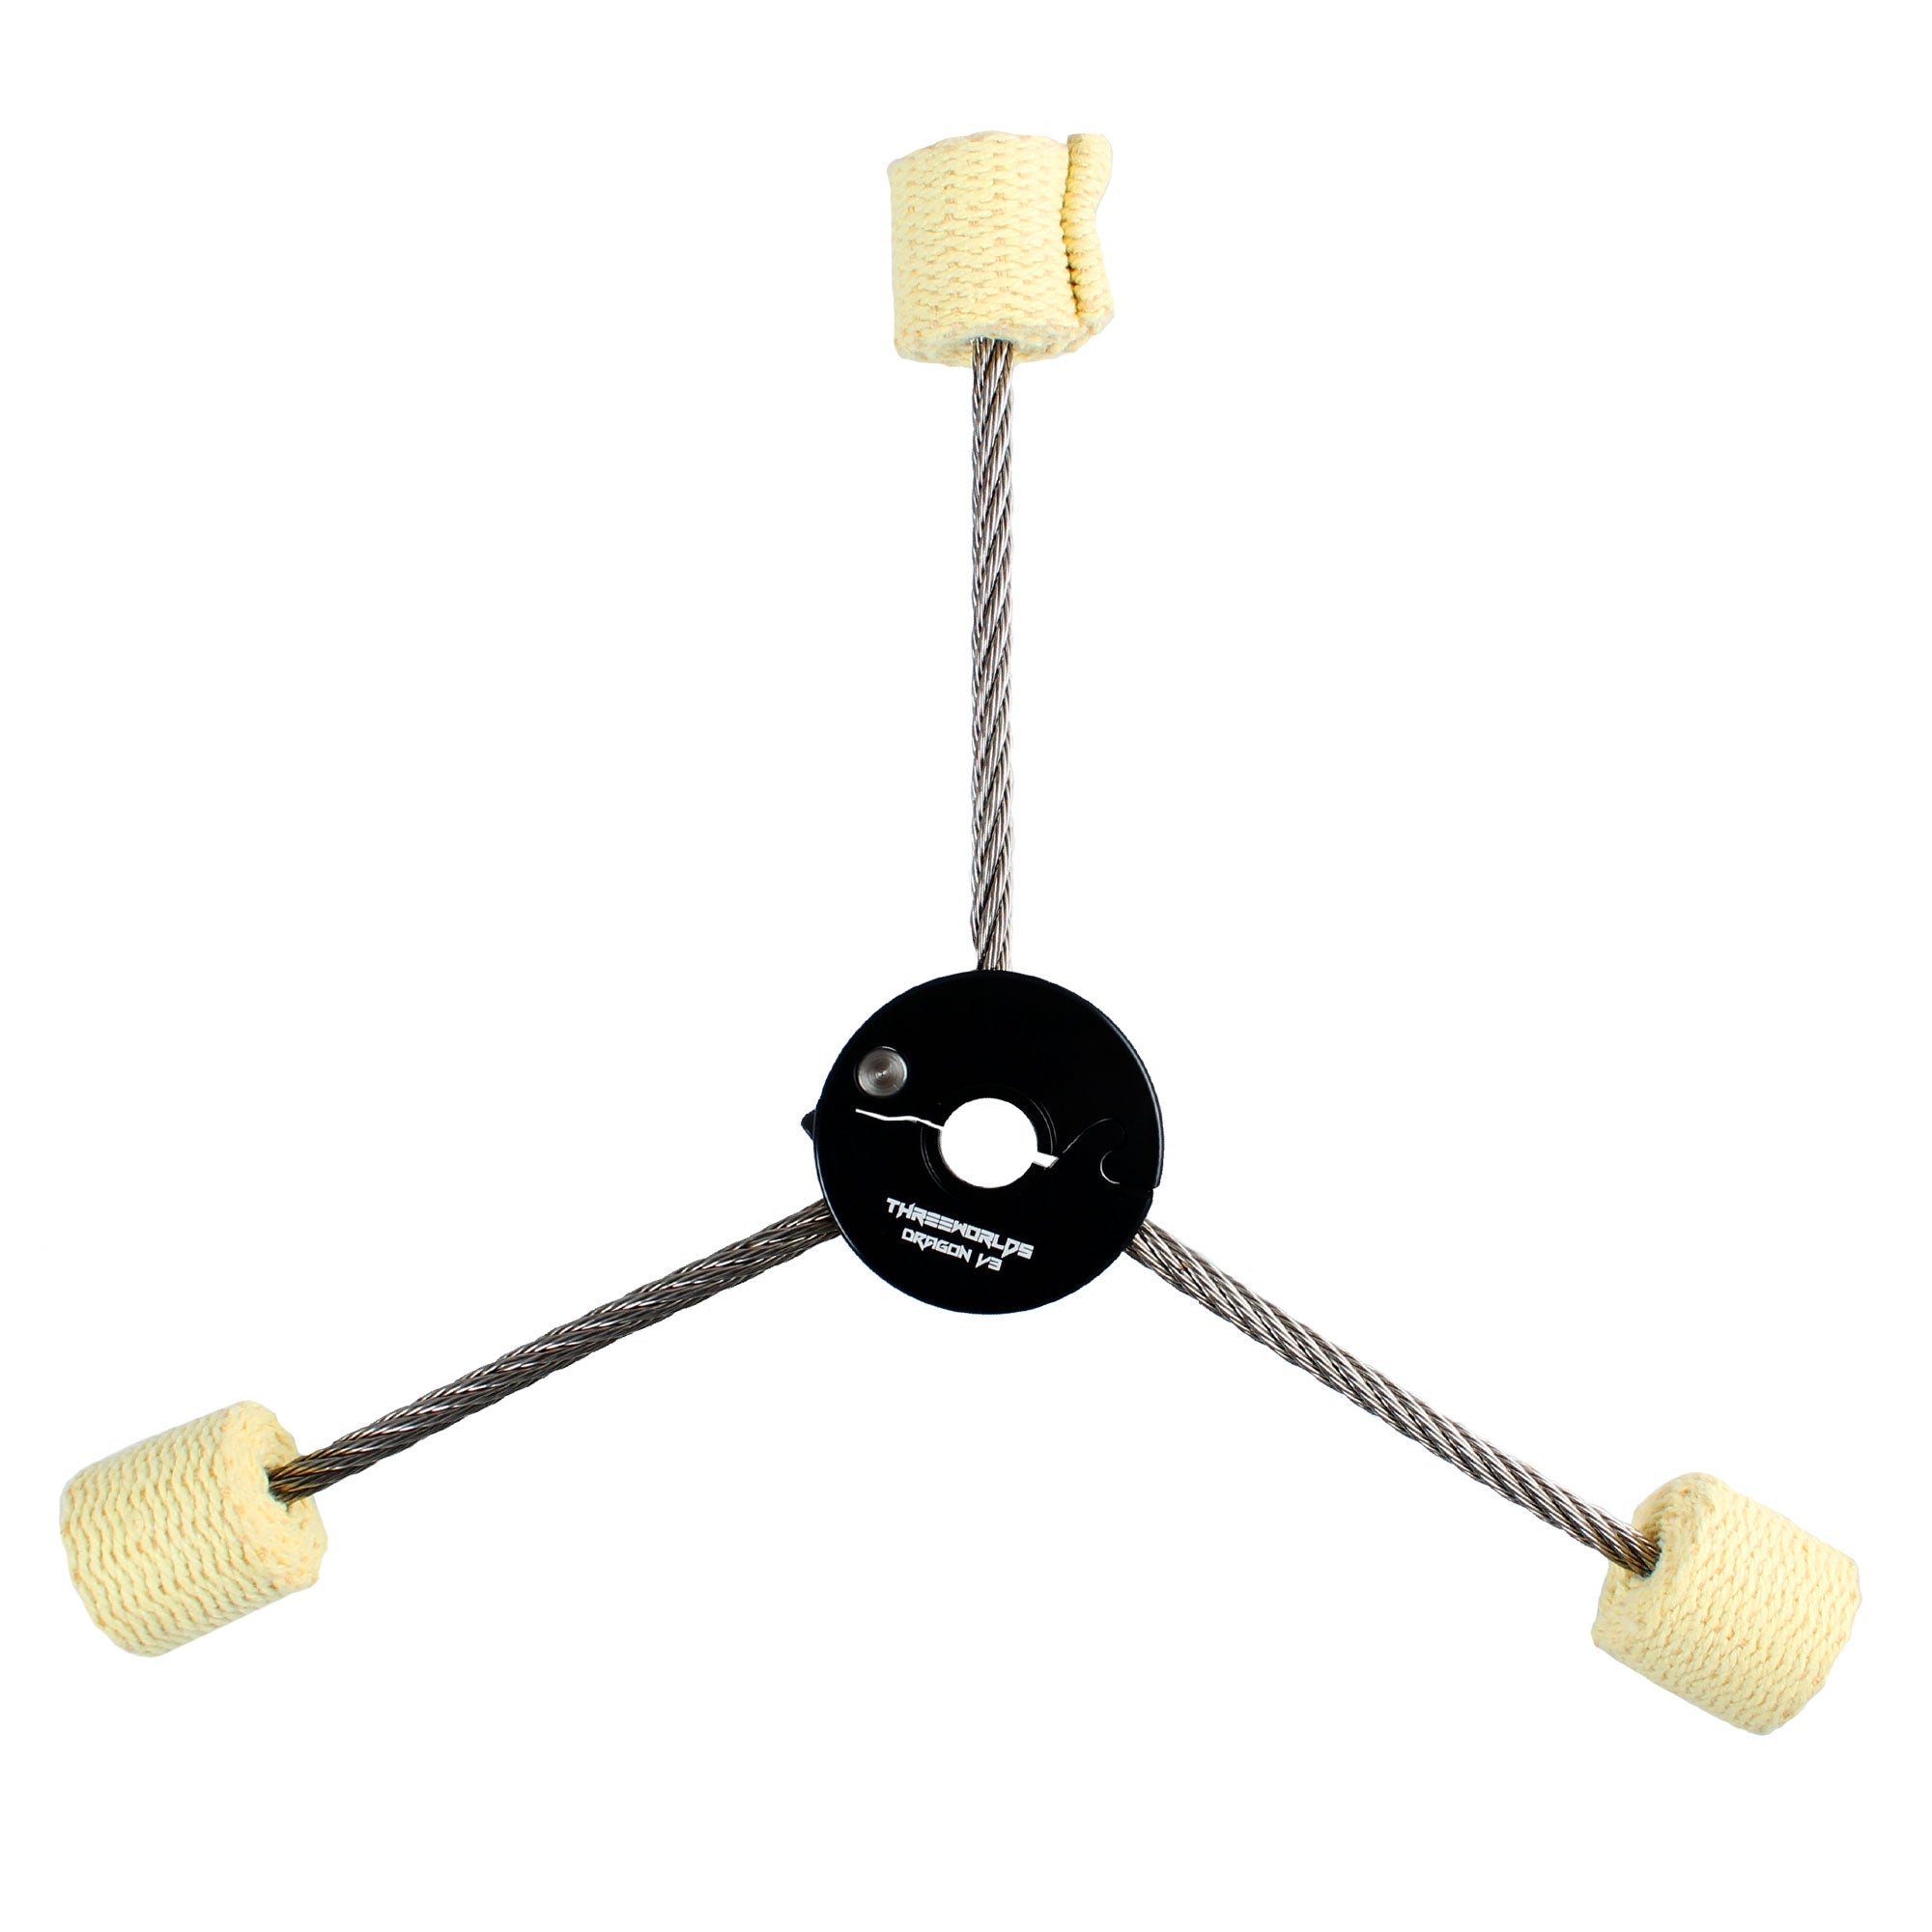 Matrix hub with 3 spines attached 